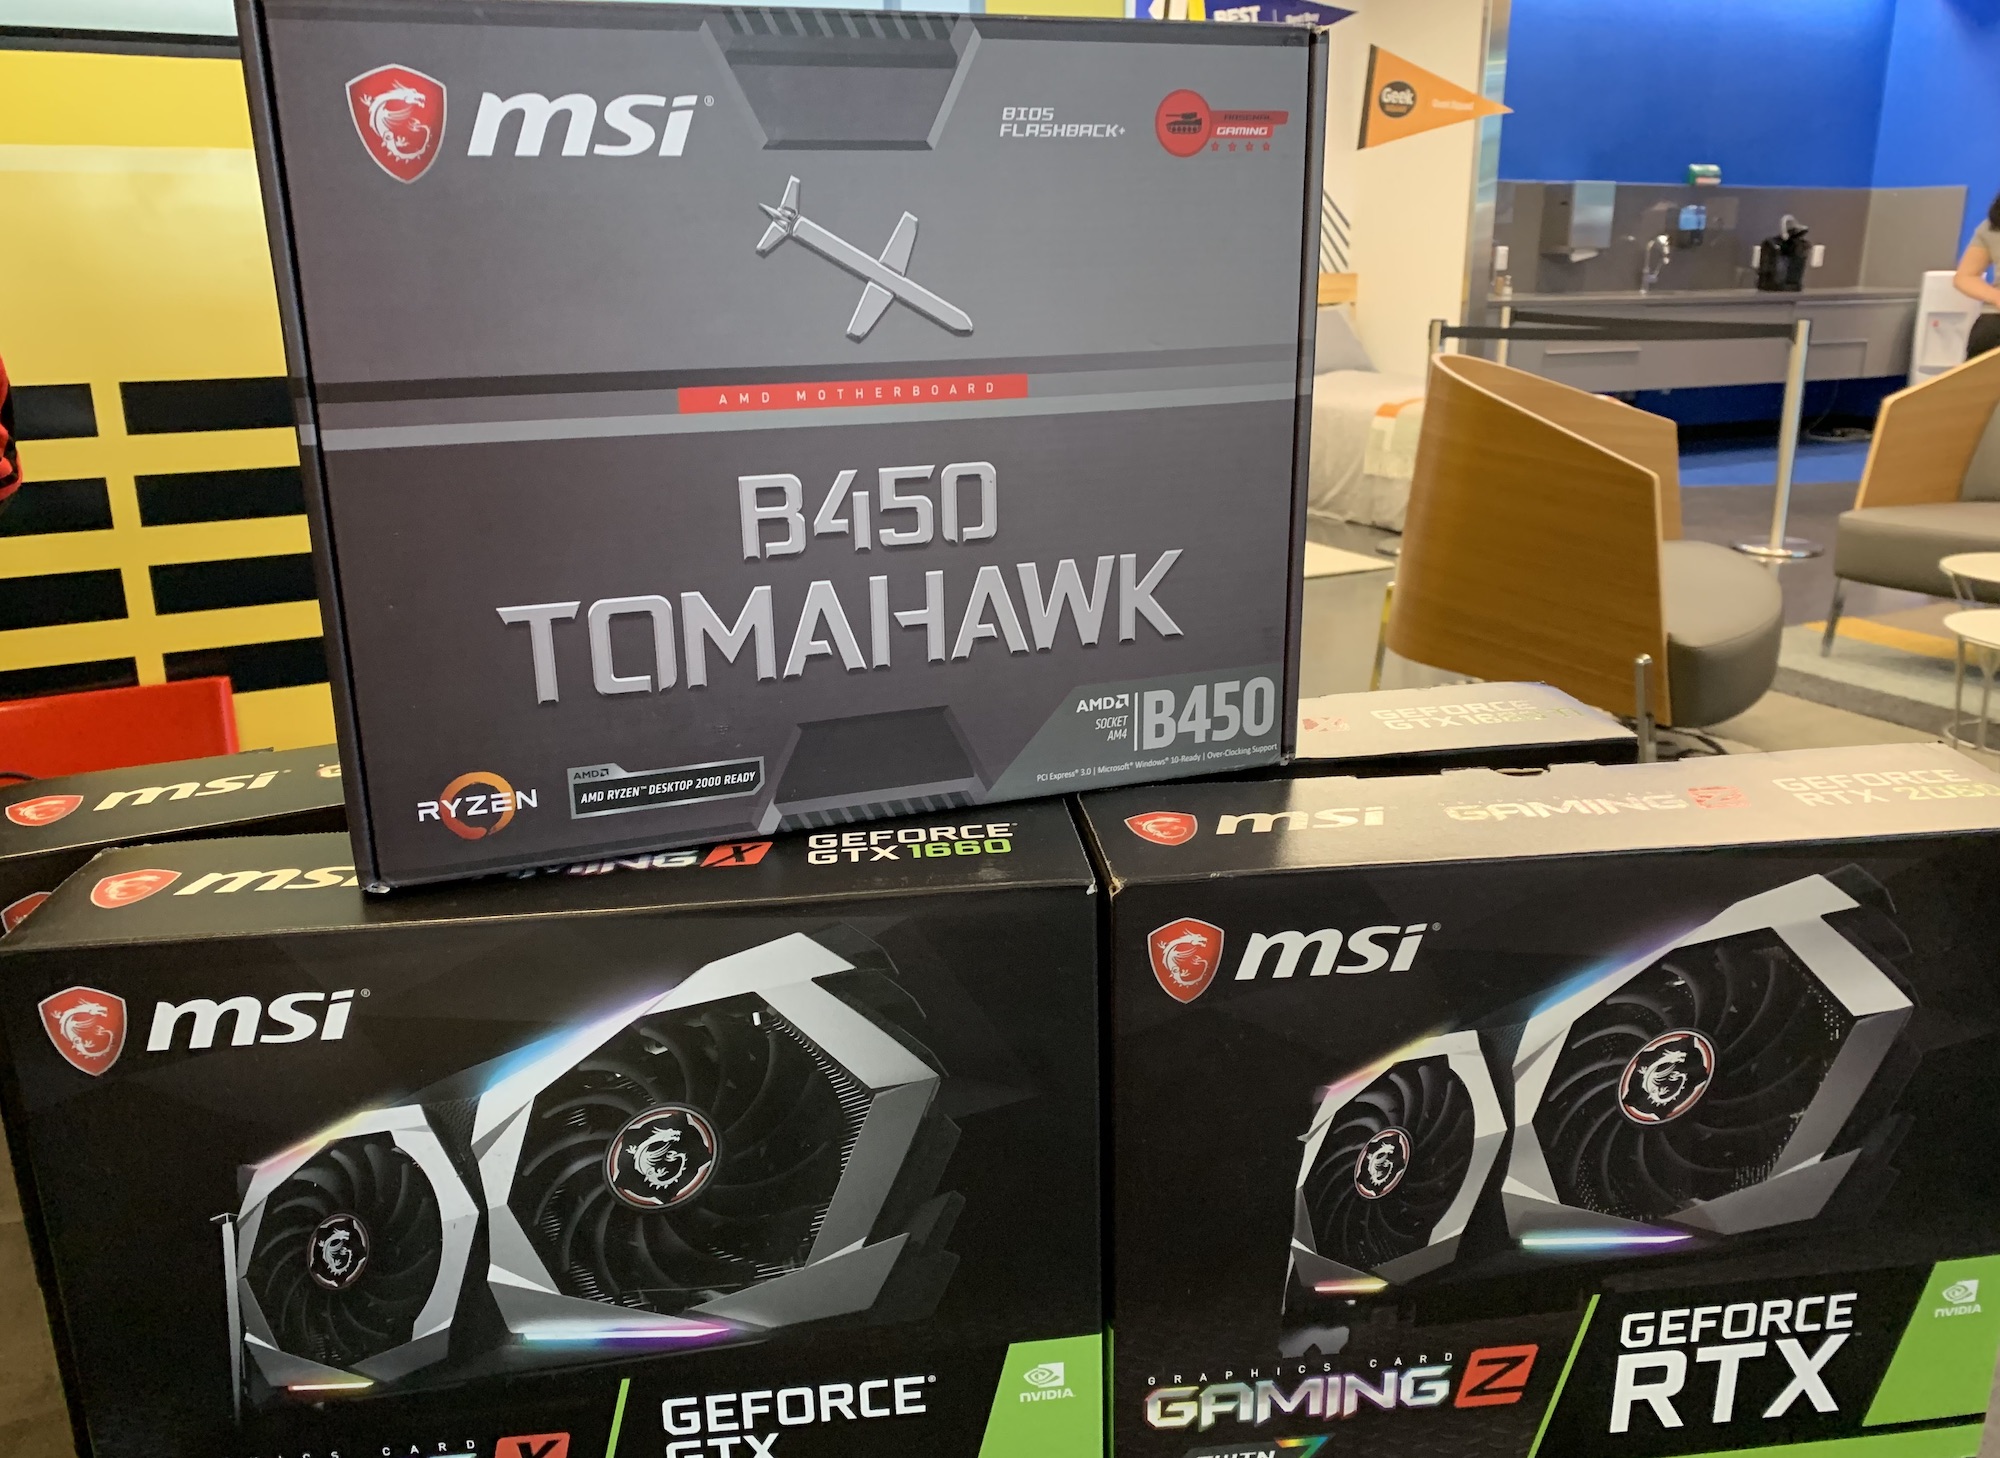 MSI NVidia GeForce for back to school